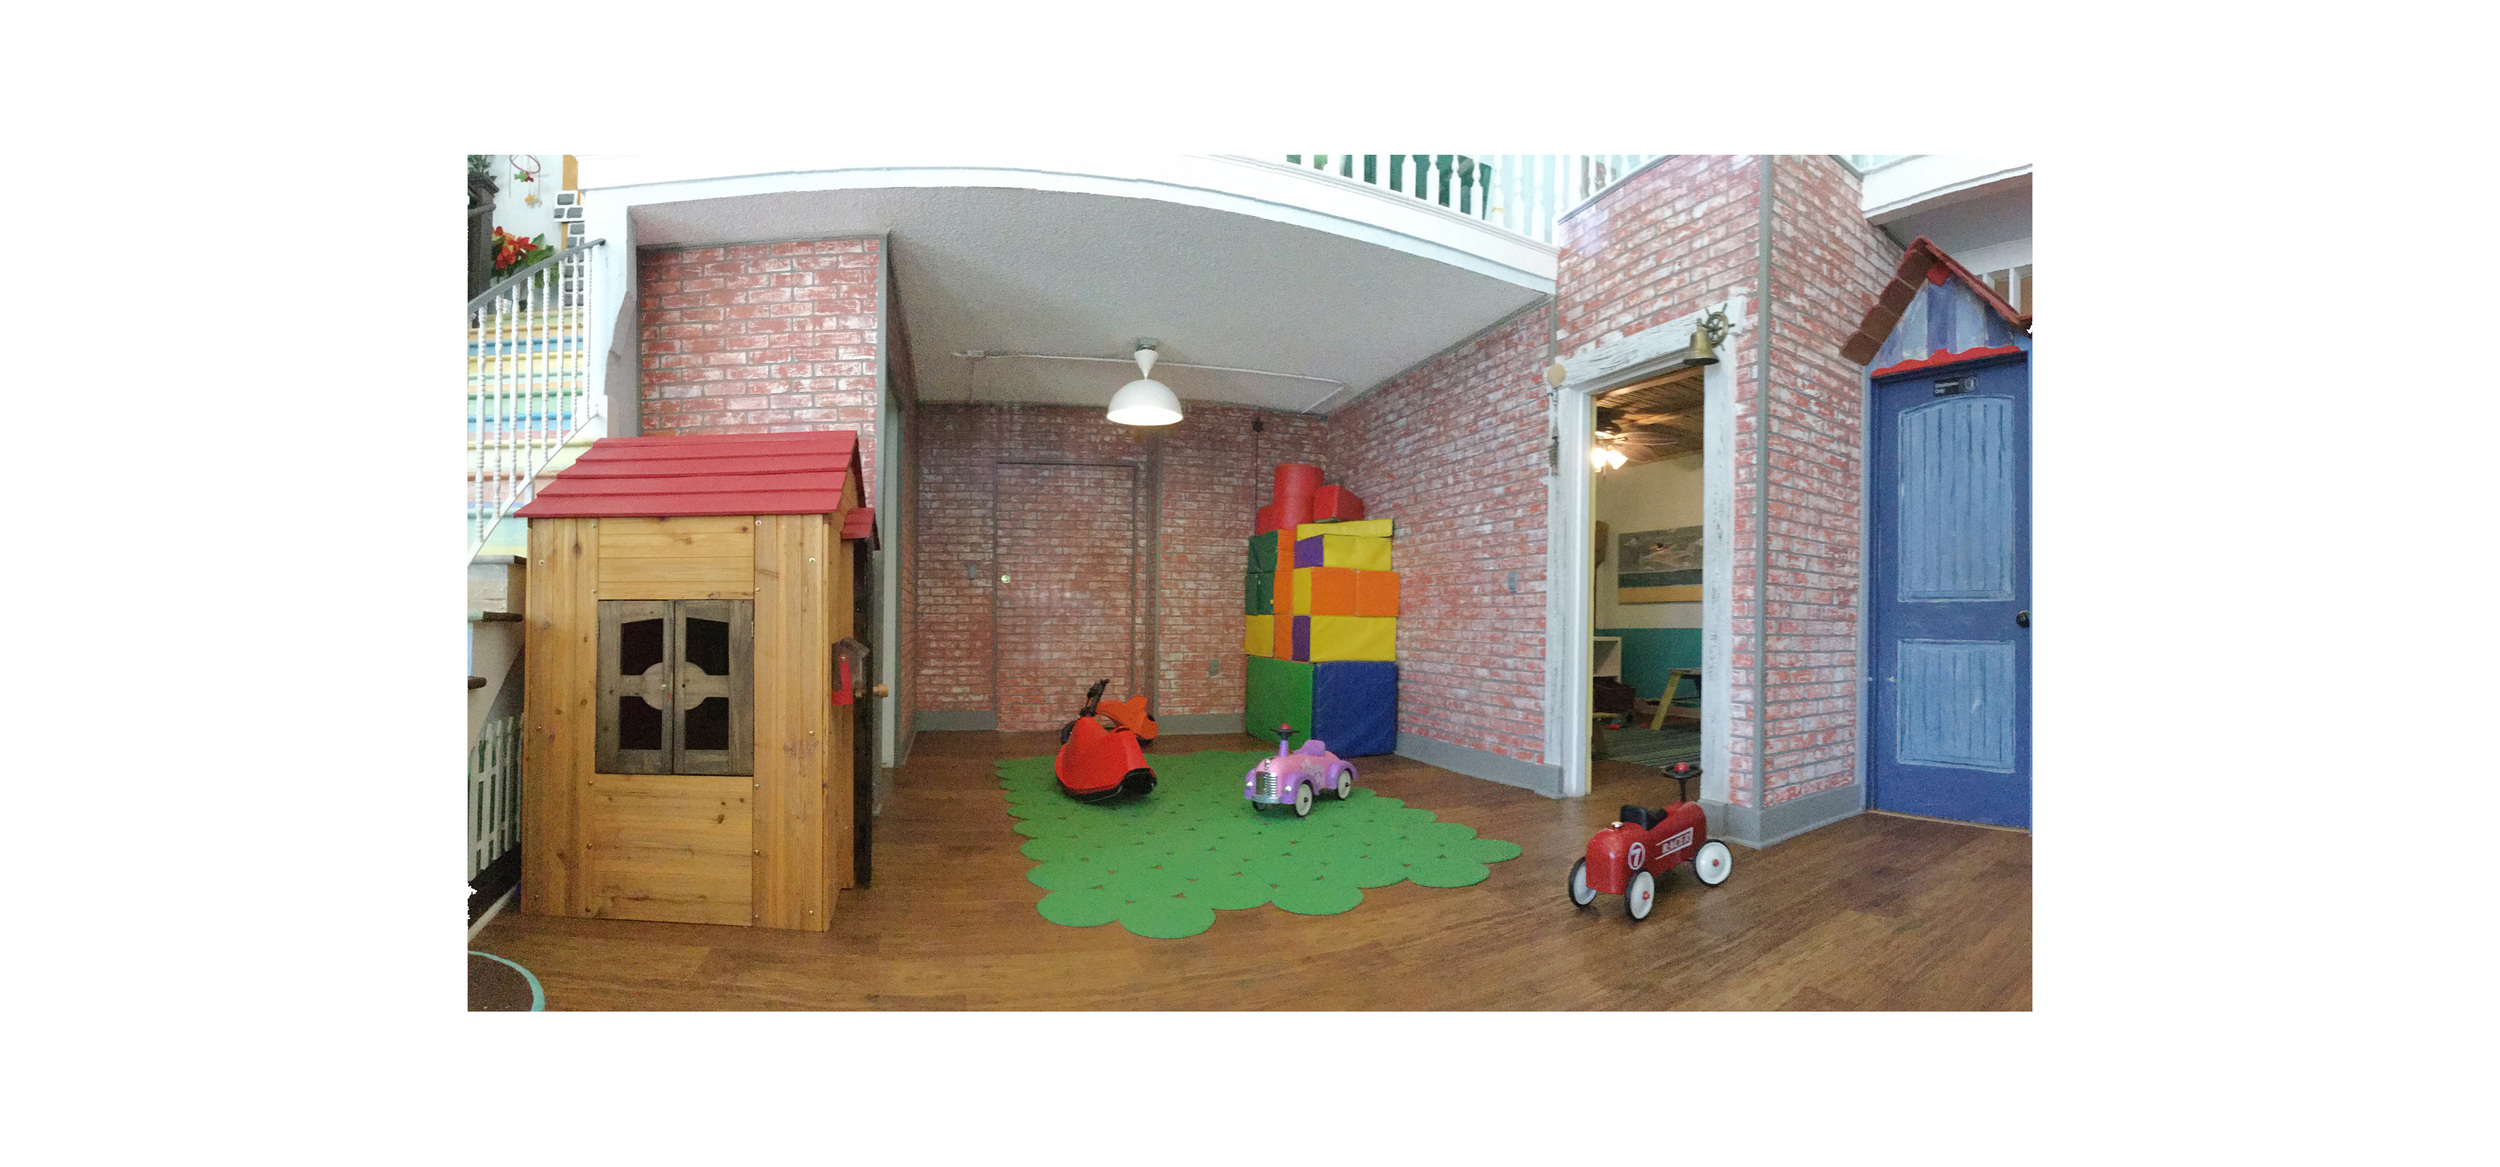 finished brick room widescreen 3.jpg